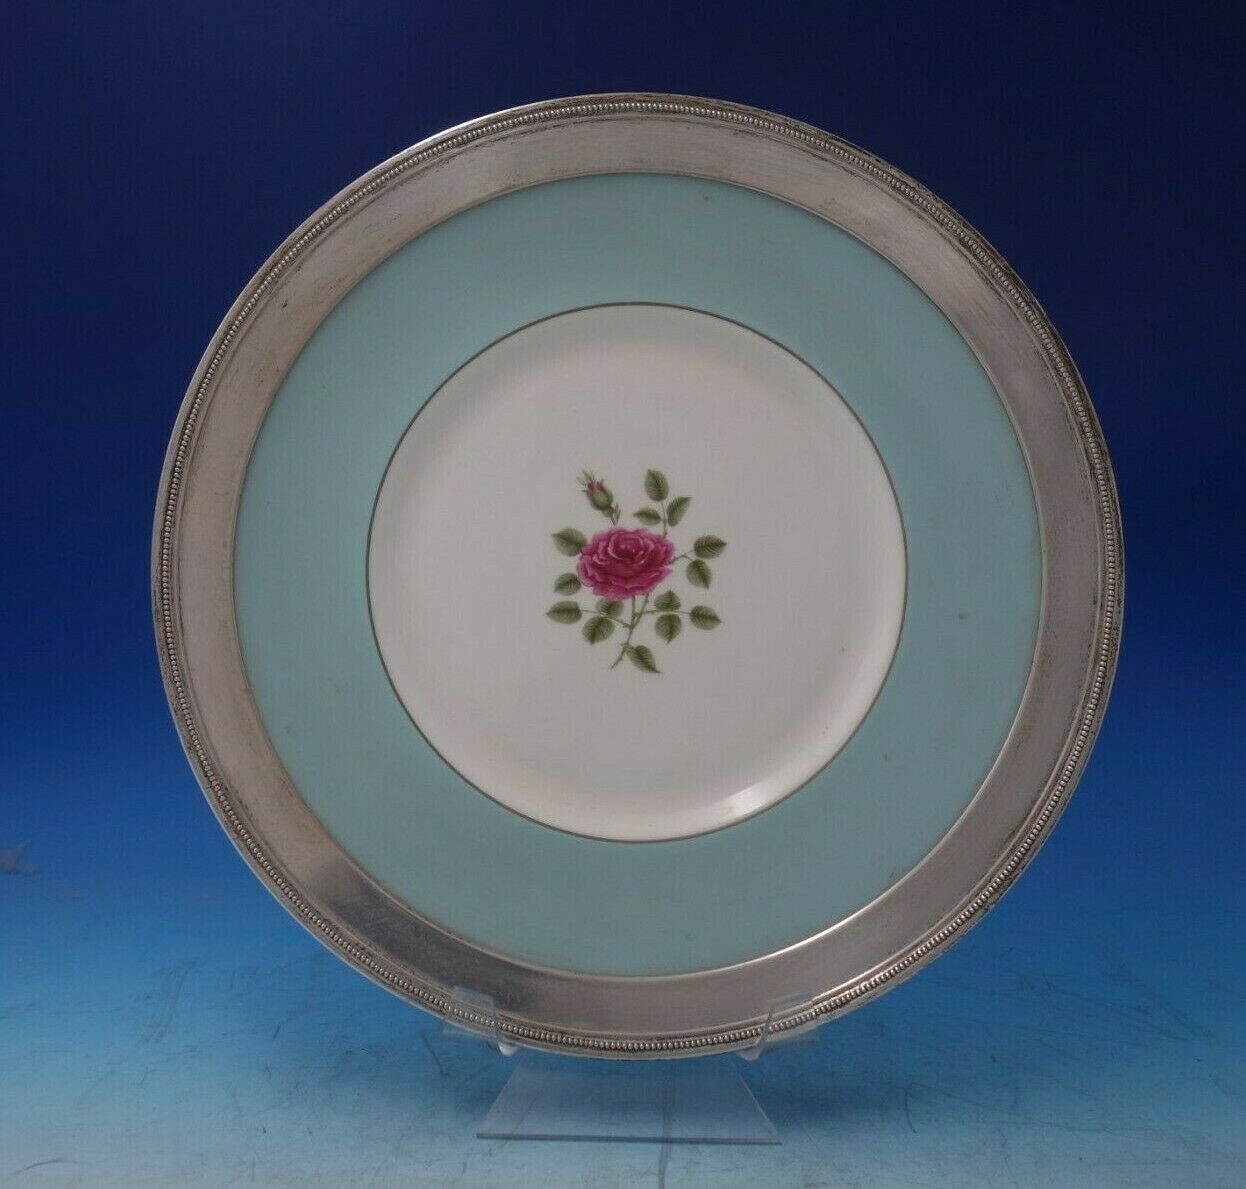 Primary image for Rose Point by Wallace Sterling Silver Royal Doulton China Serving Plate (#5759)